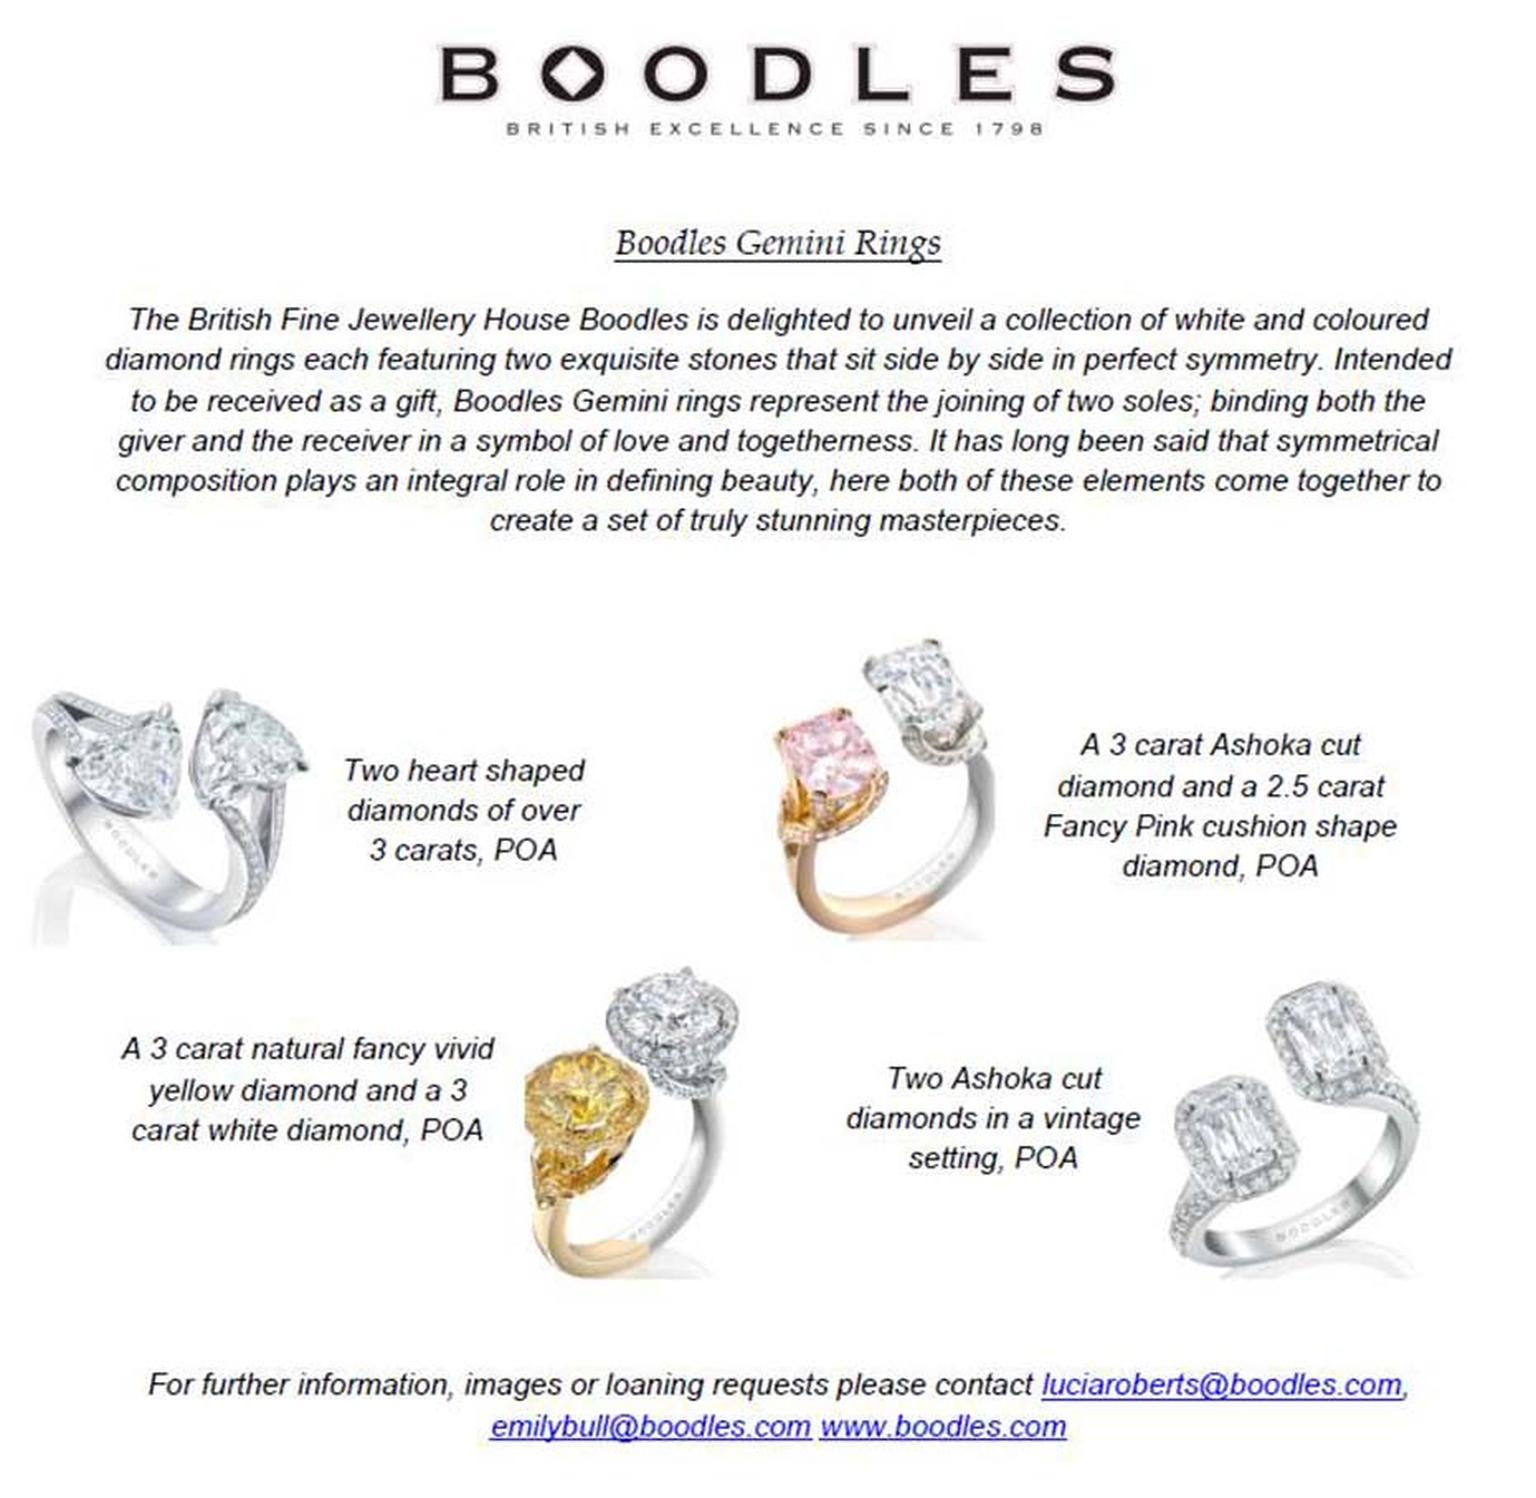 Boodles Gemini ring collection